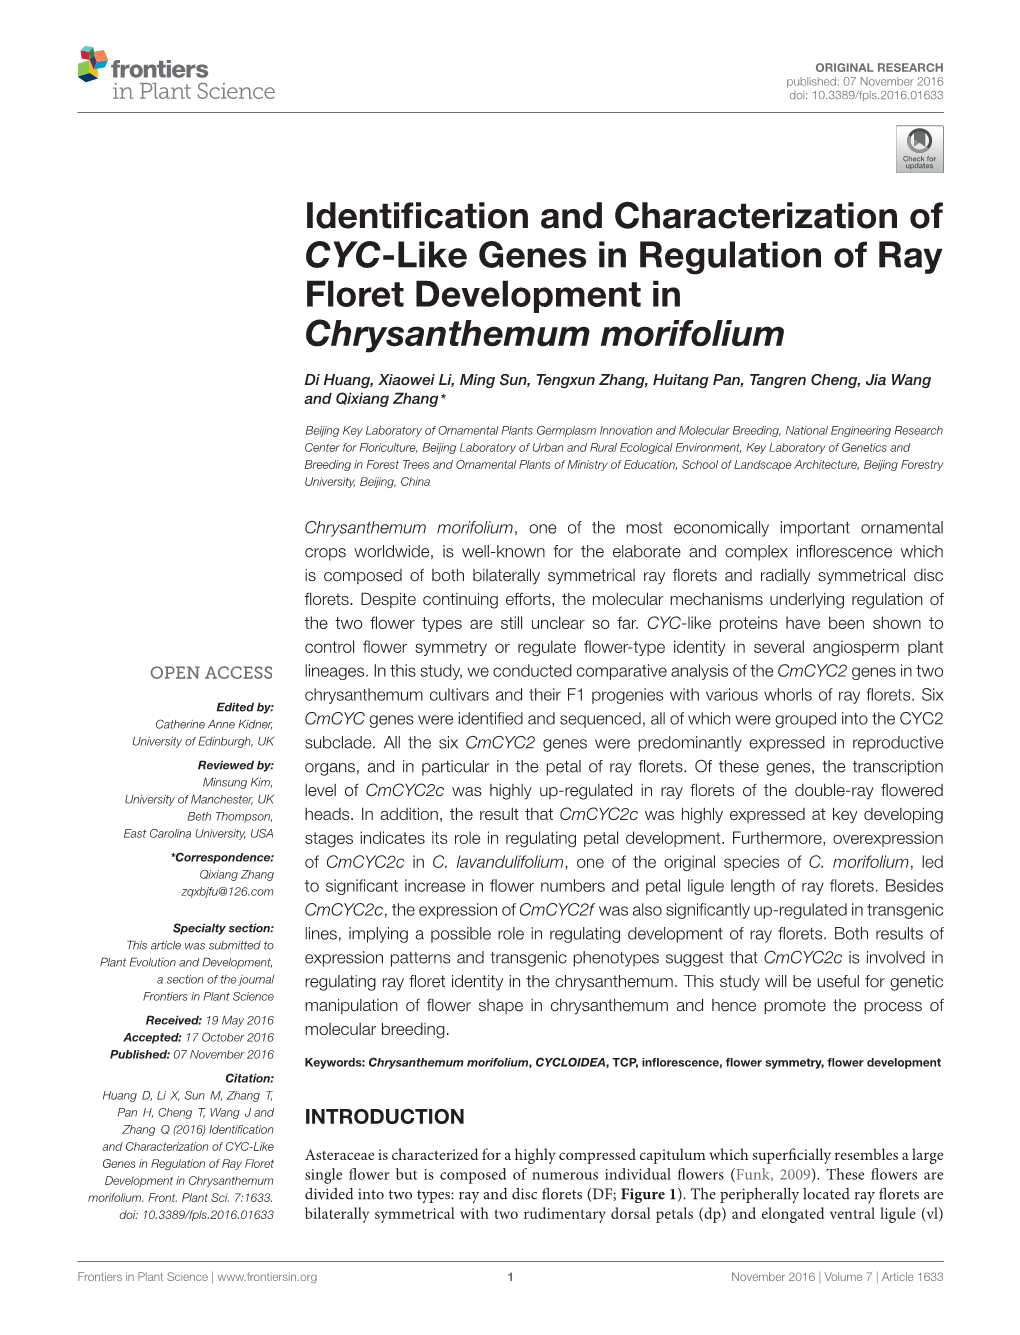 Identification and Characterization of CYC-Like Genes in Regulation Of